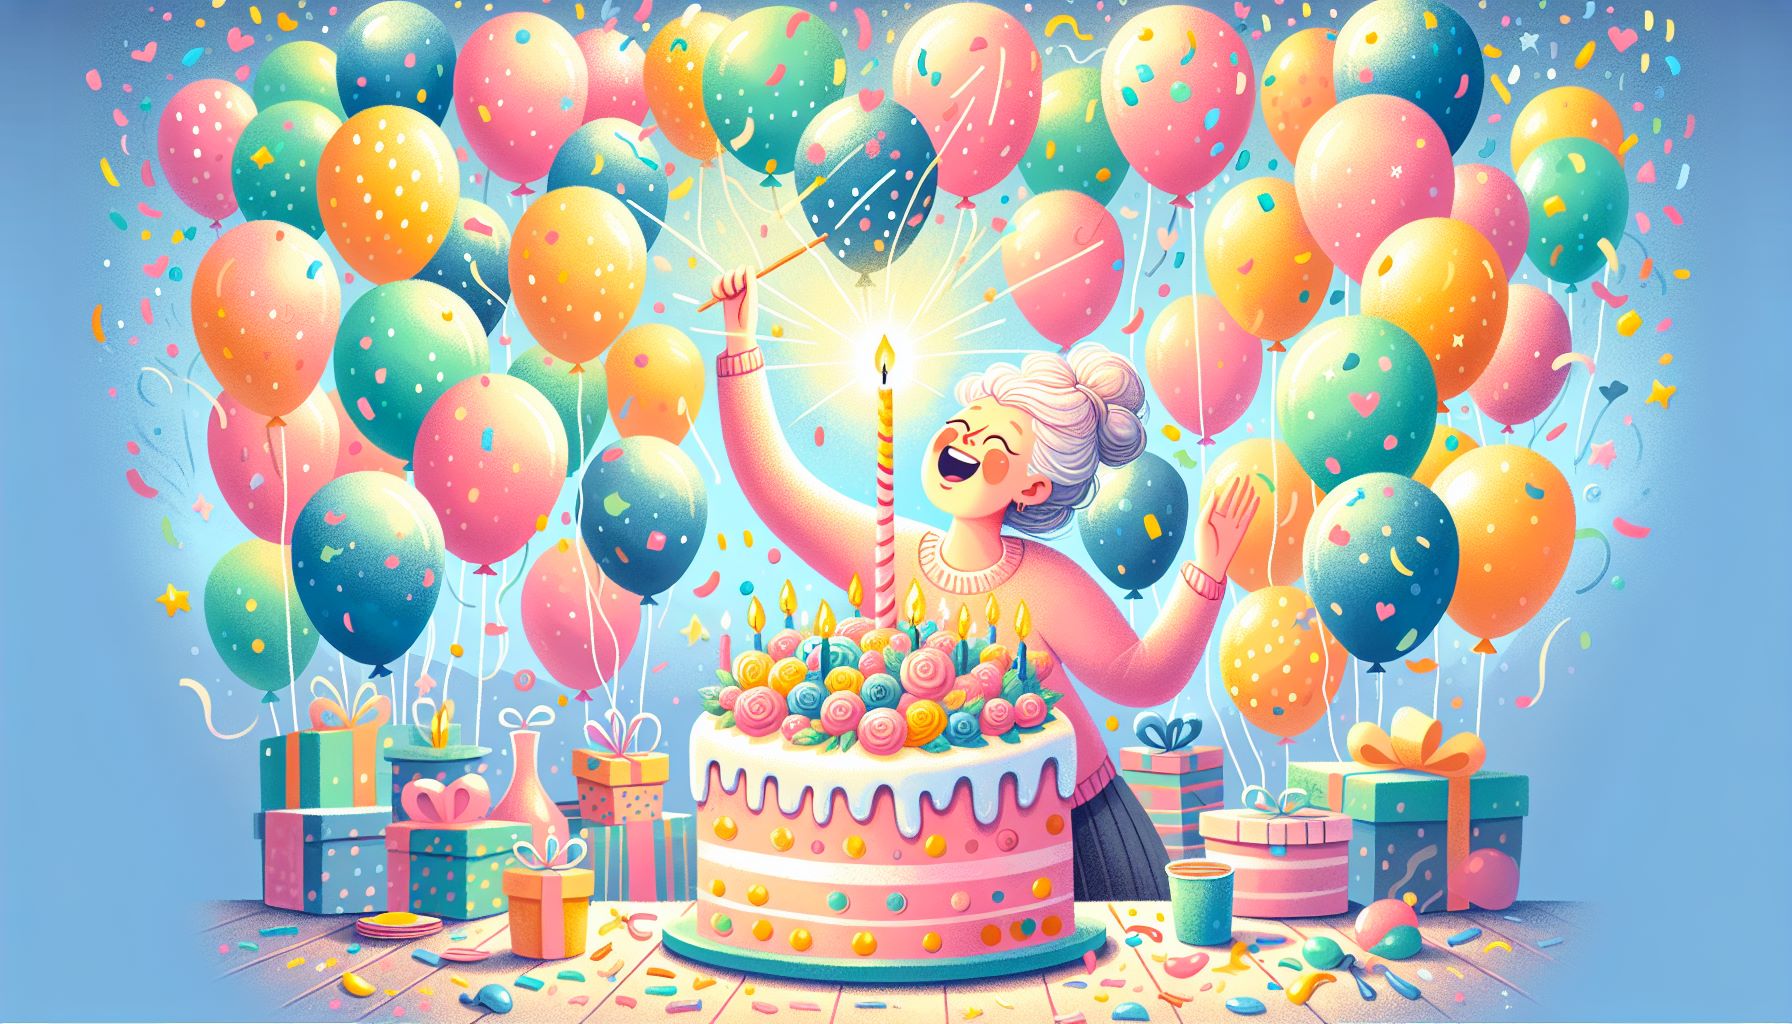 Illustration of a person celebrating a birthday